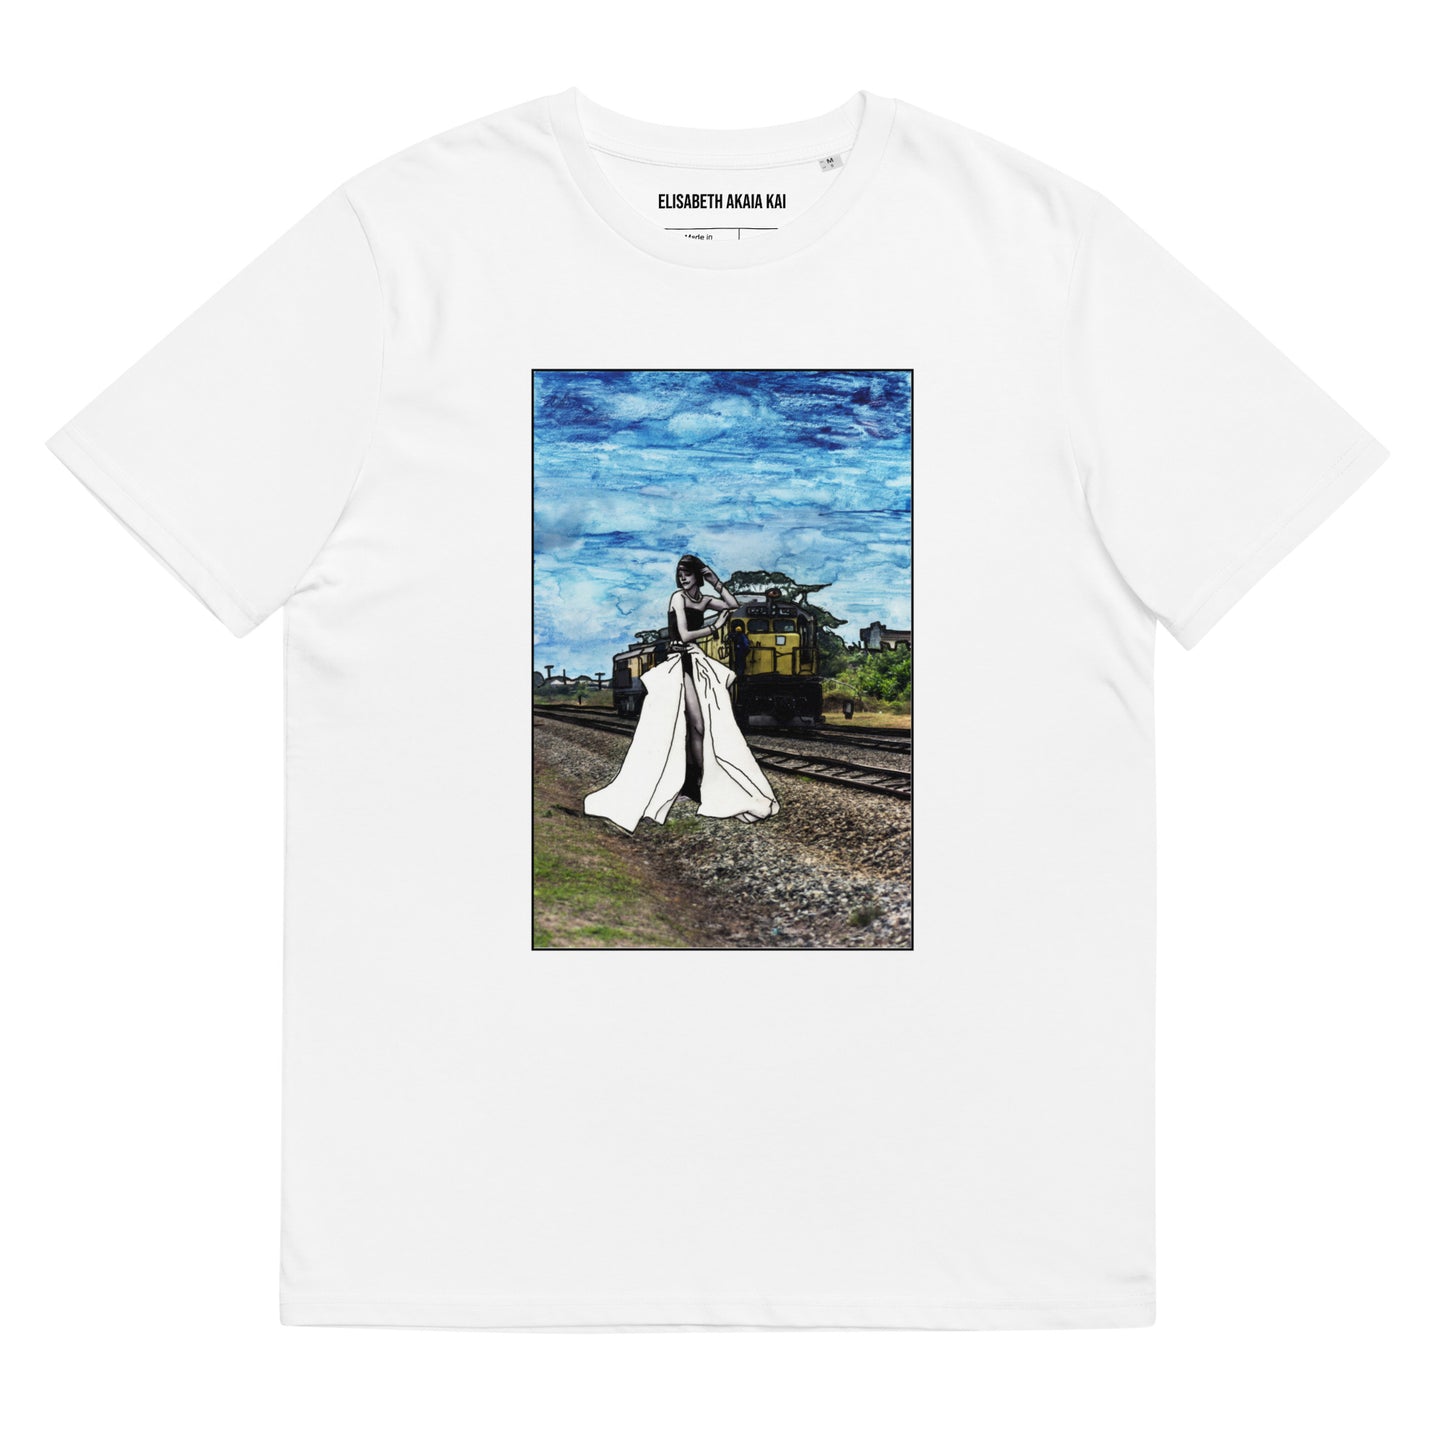 THE GIRL AND THE TRAIN - Unisex organic cotton T-shirt